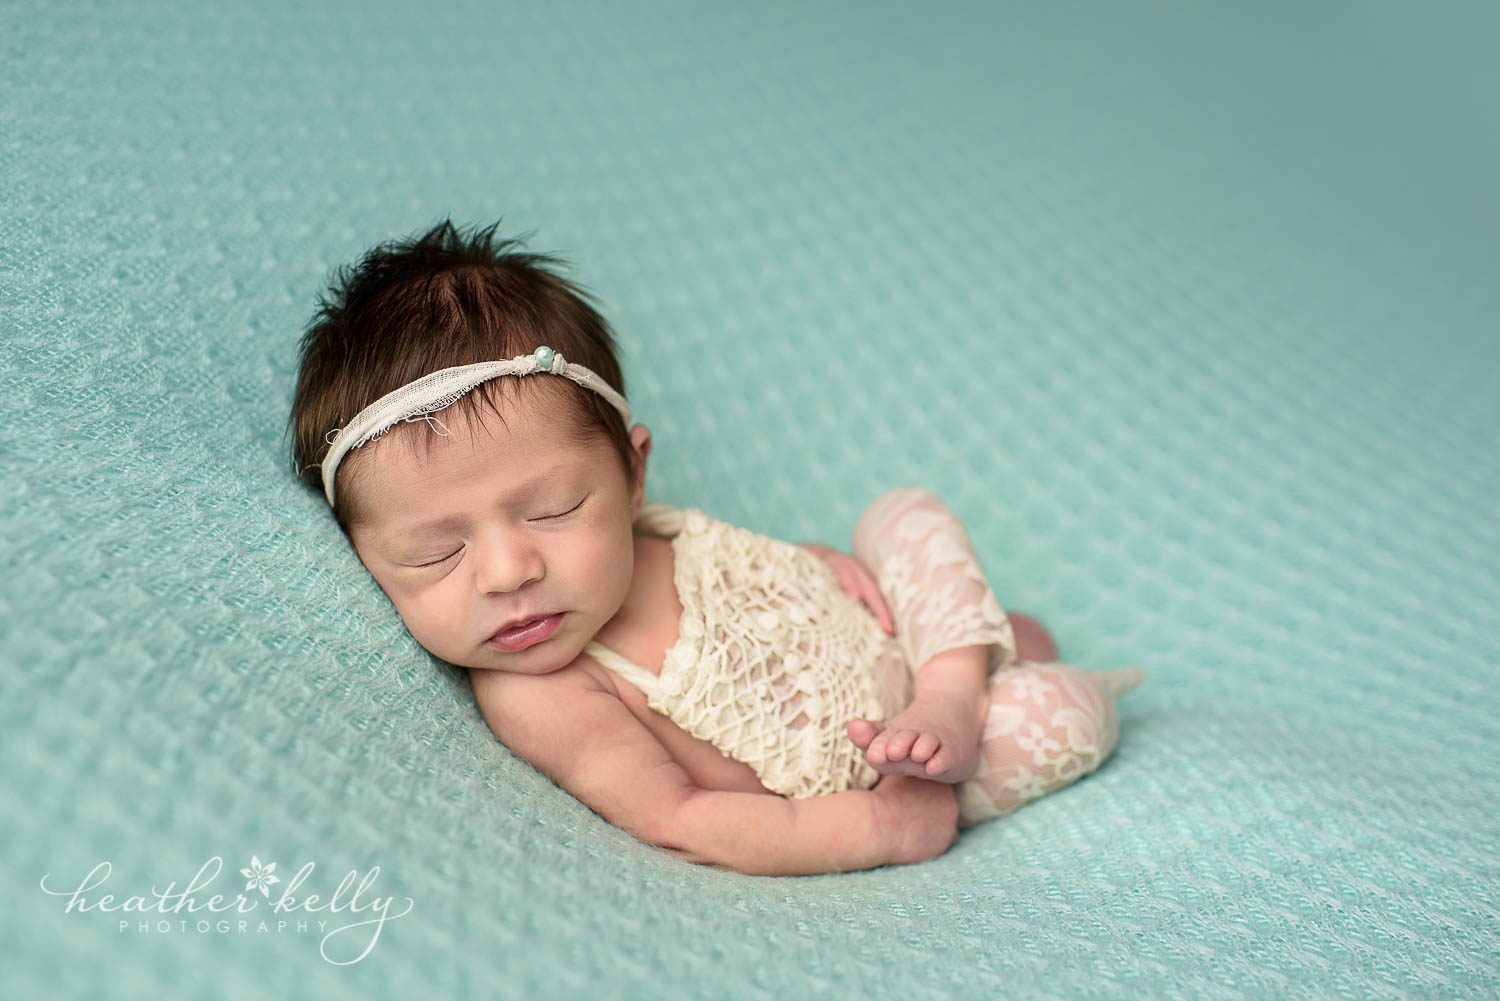 newborn photography photo. Baby girl in cream lace outfit on back. monroe ct newborn photography